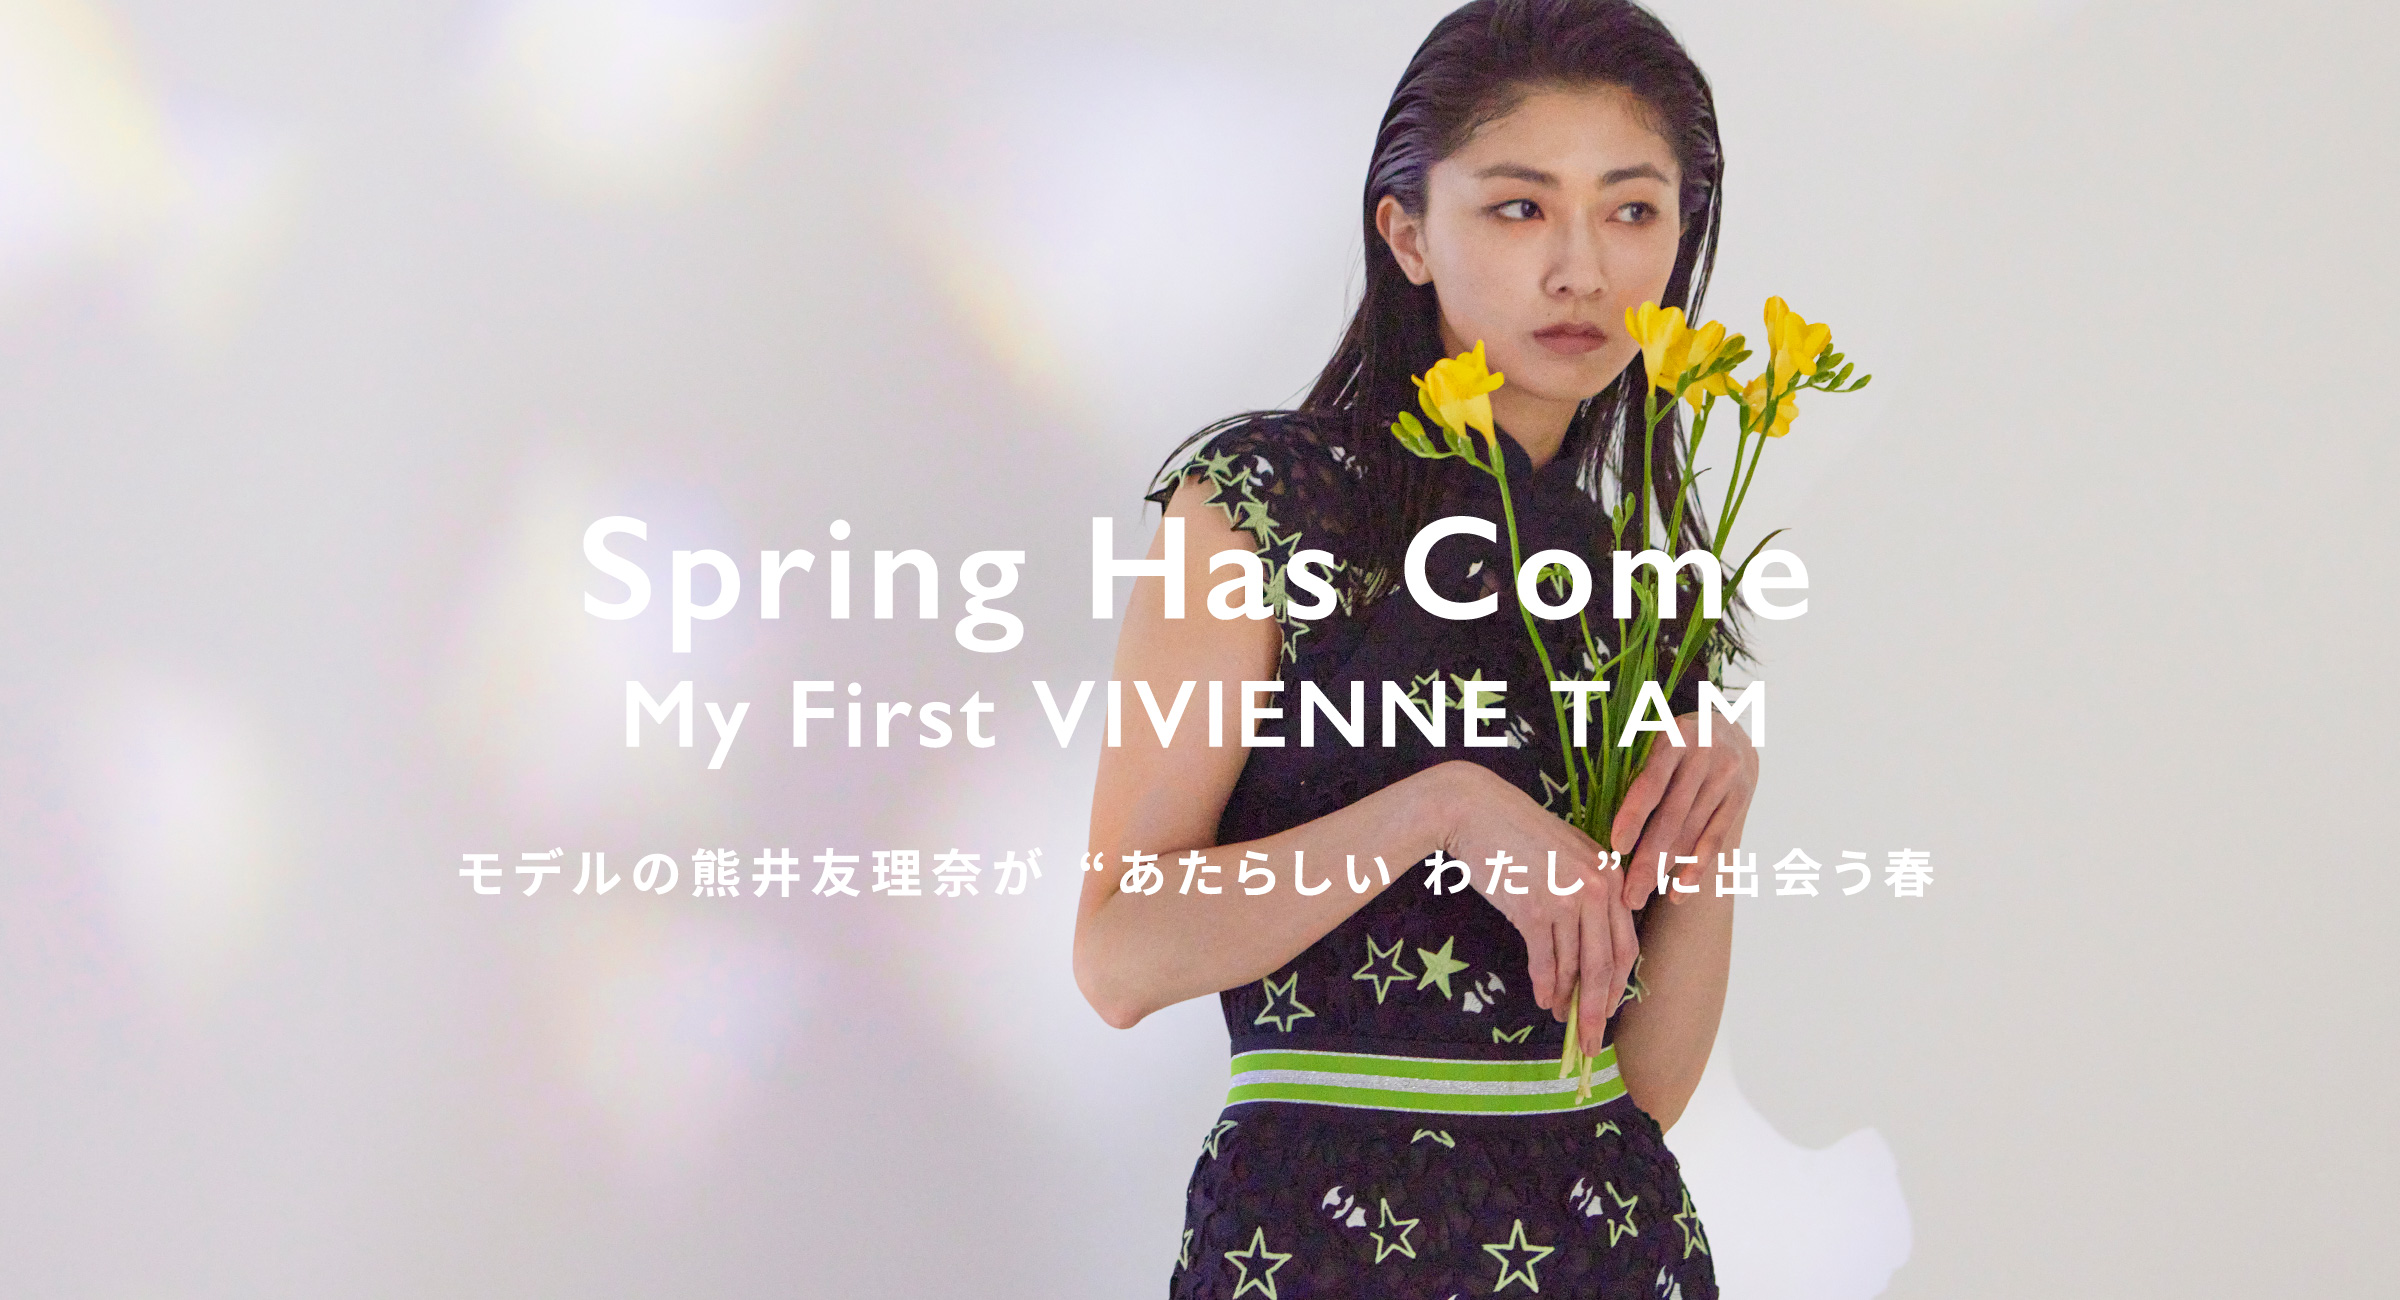 Spring Has Come My First VIVIENNE TAM モデルの熊井友理奈が“あたらしい わたし” に出会う春